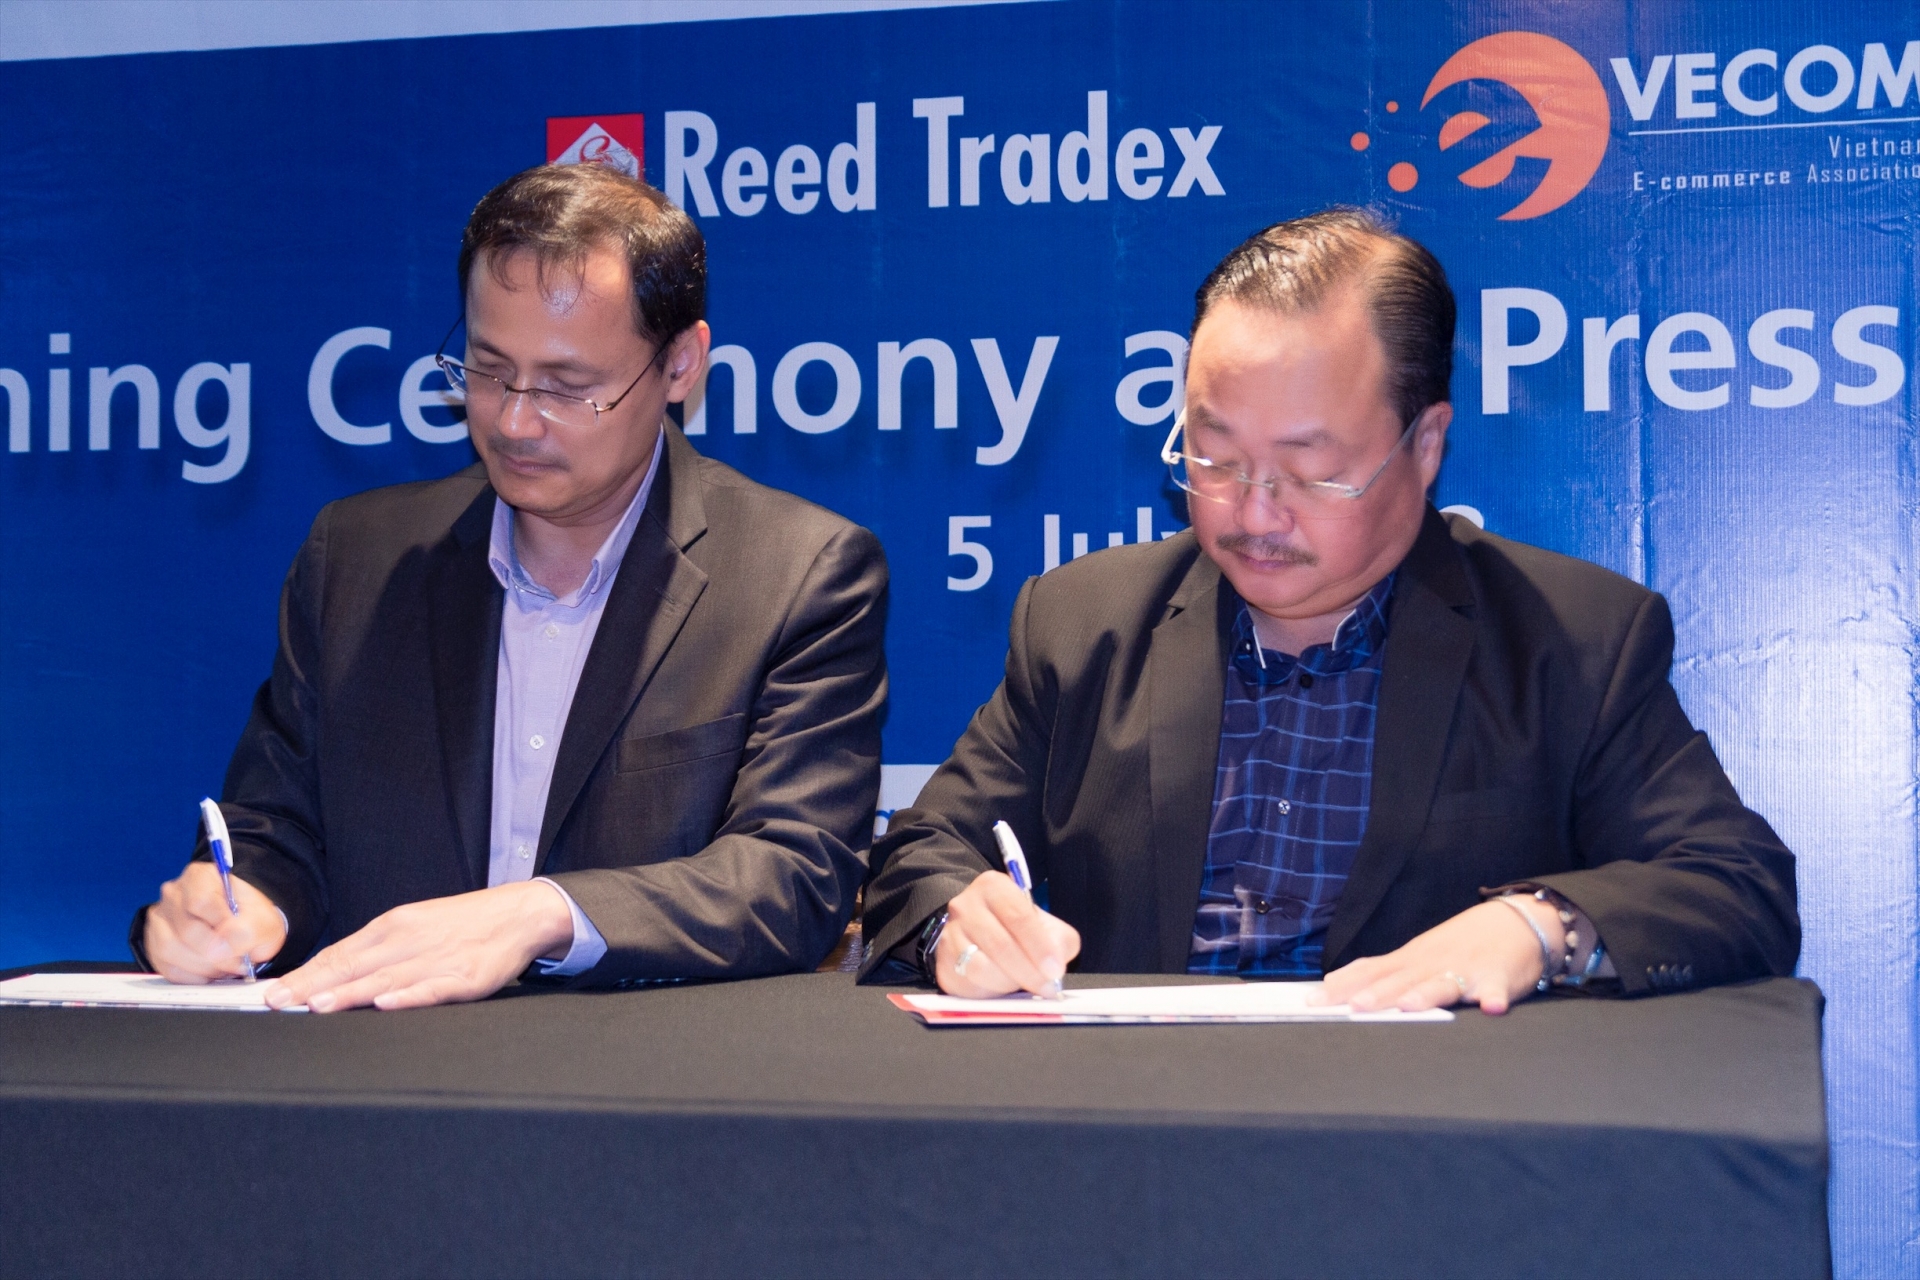 Reed Tradex ties up with VECOM to promote the trend of omnichannel retailing